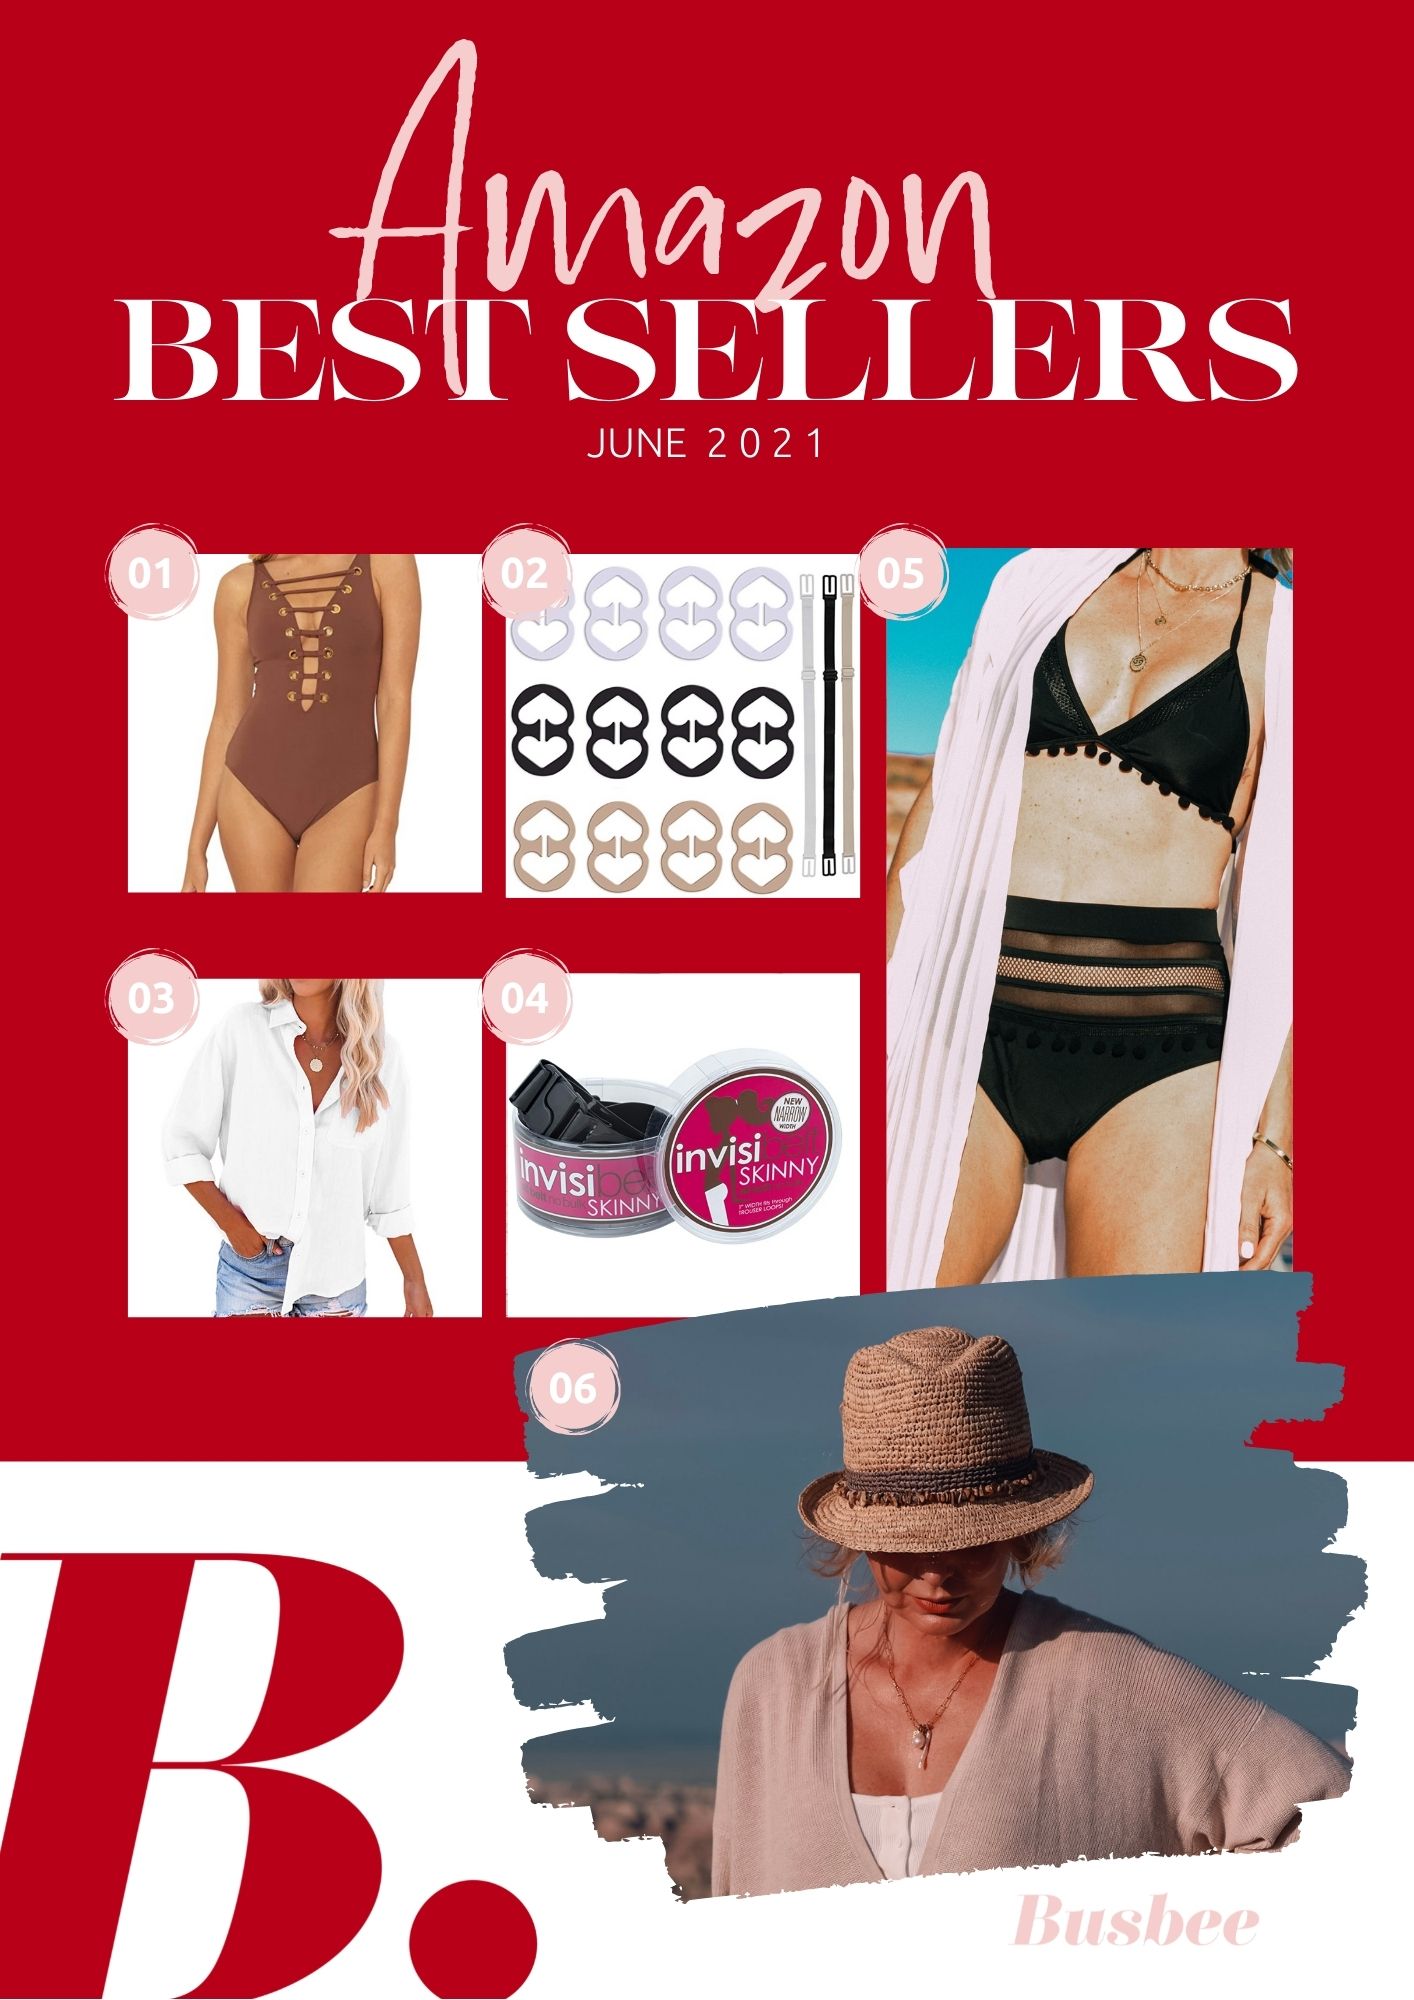 amazon best sellers, best sellers from amazon, $26 amazon swimsuit, rod beattie one piece swimsuit, bra clips, invisabelt, white button down shirt, packable hat, adjustable hat